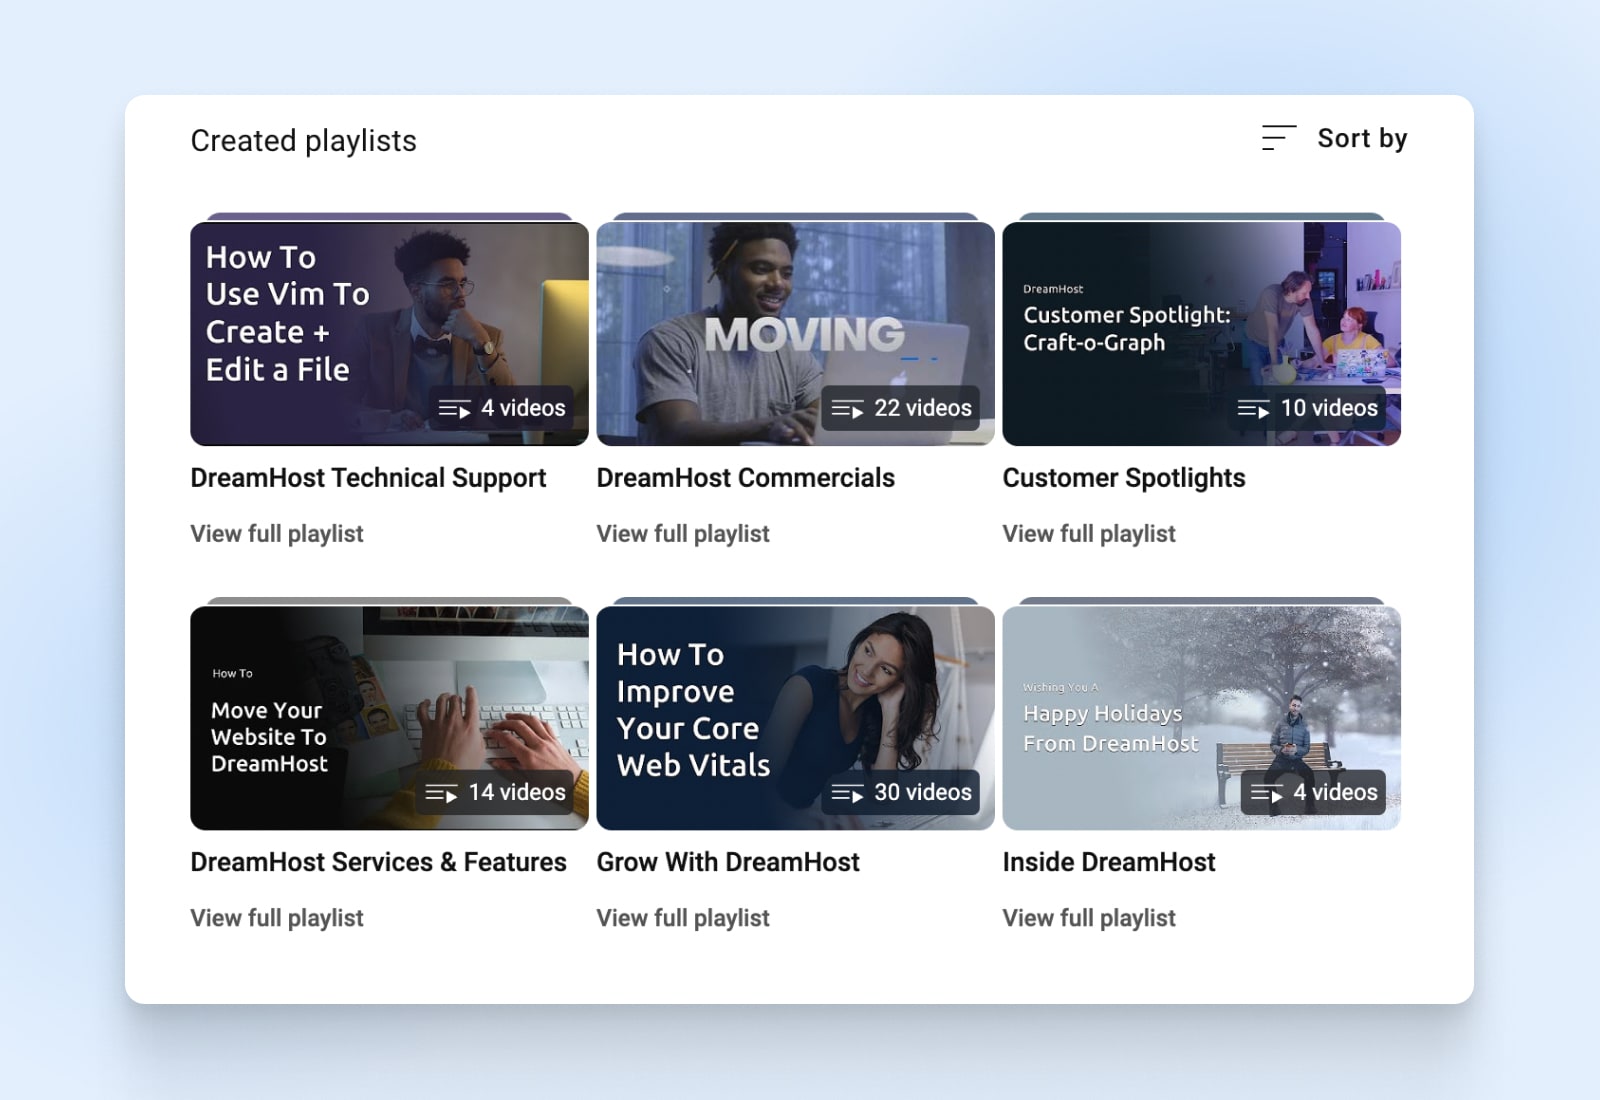 screenshot of created playlists from DreamHost including: DreamHost service and features and grow with DreamHost